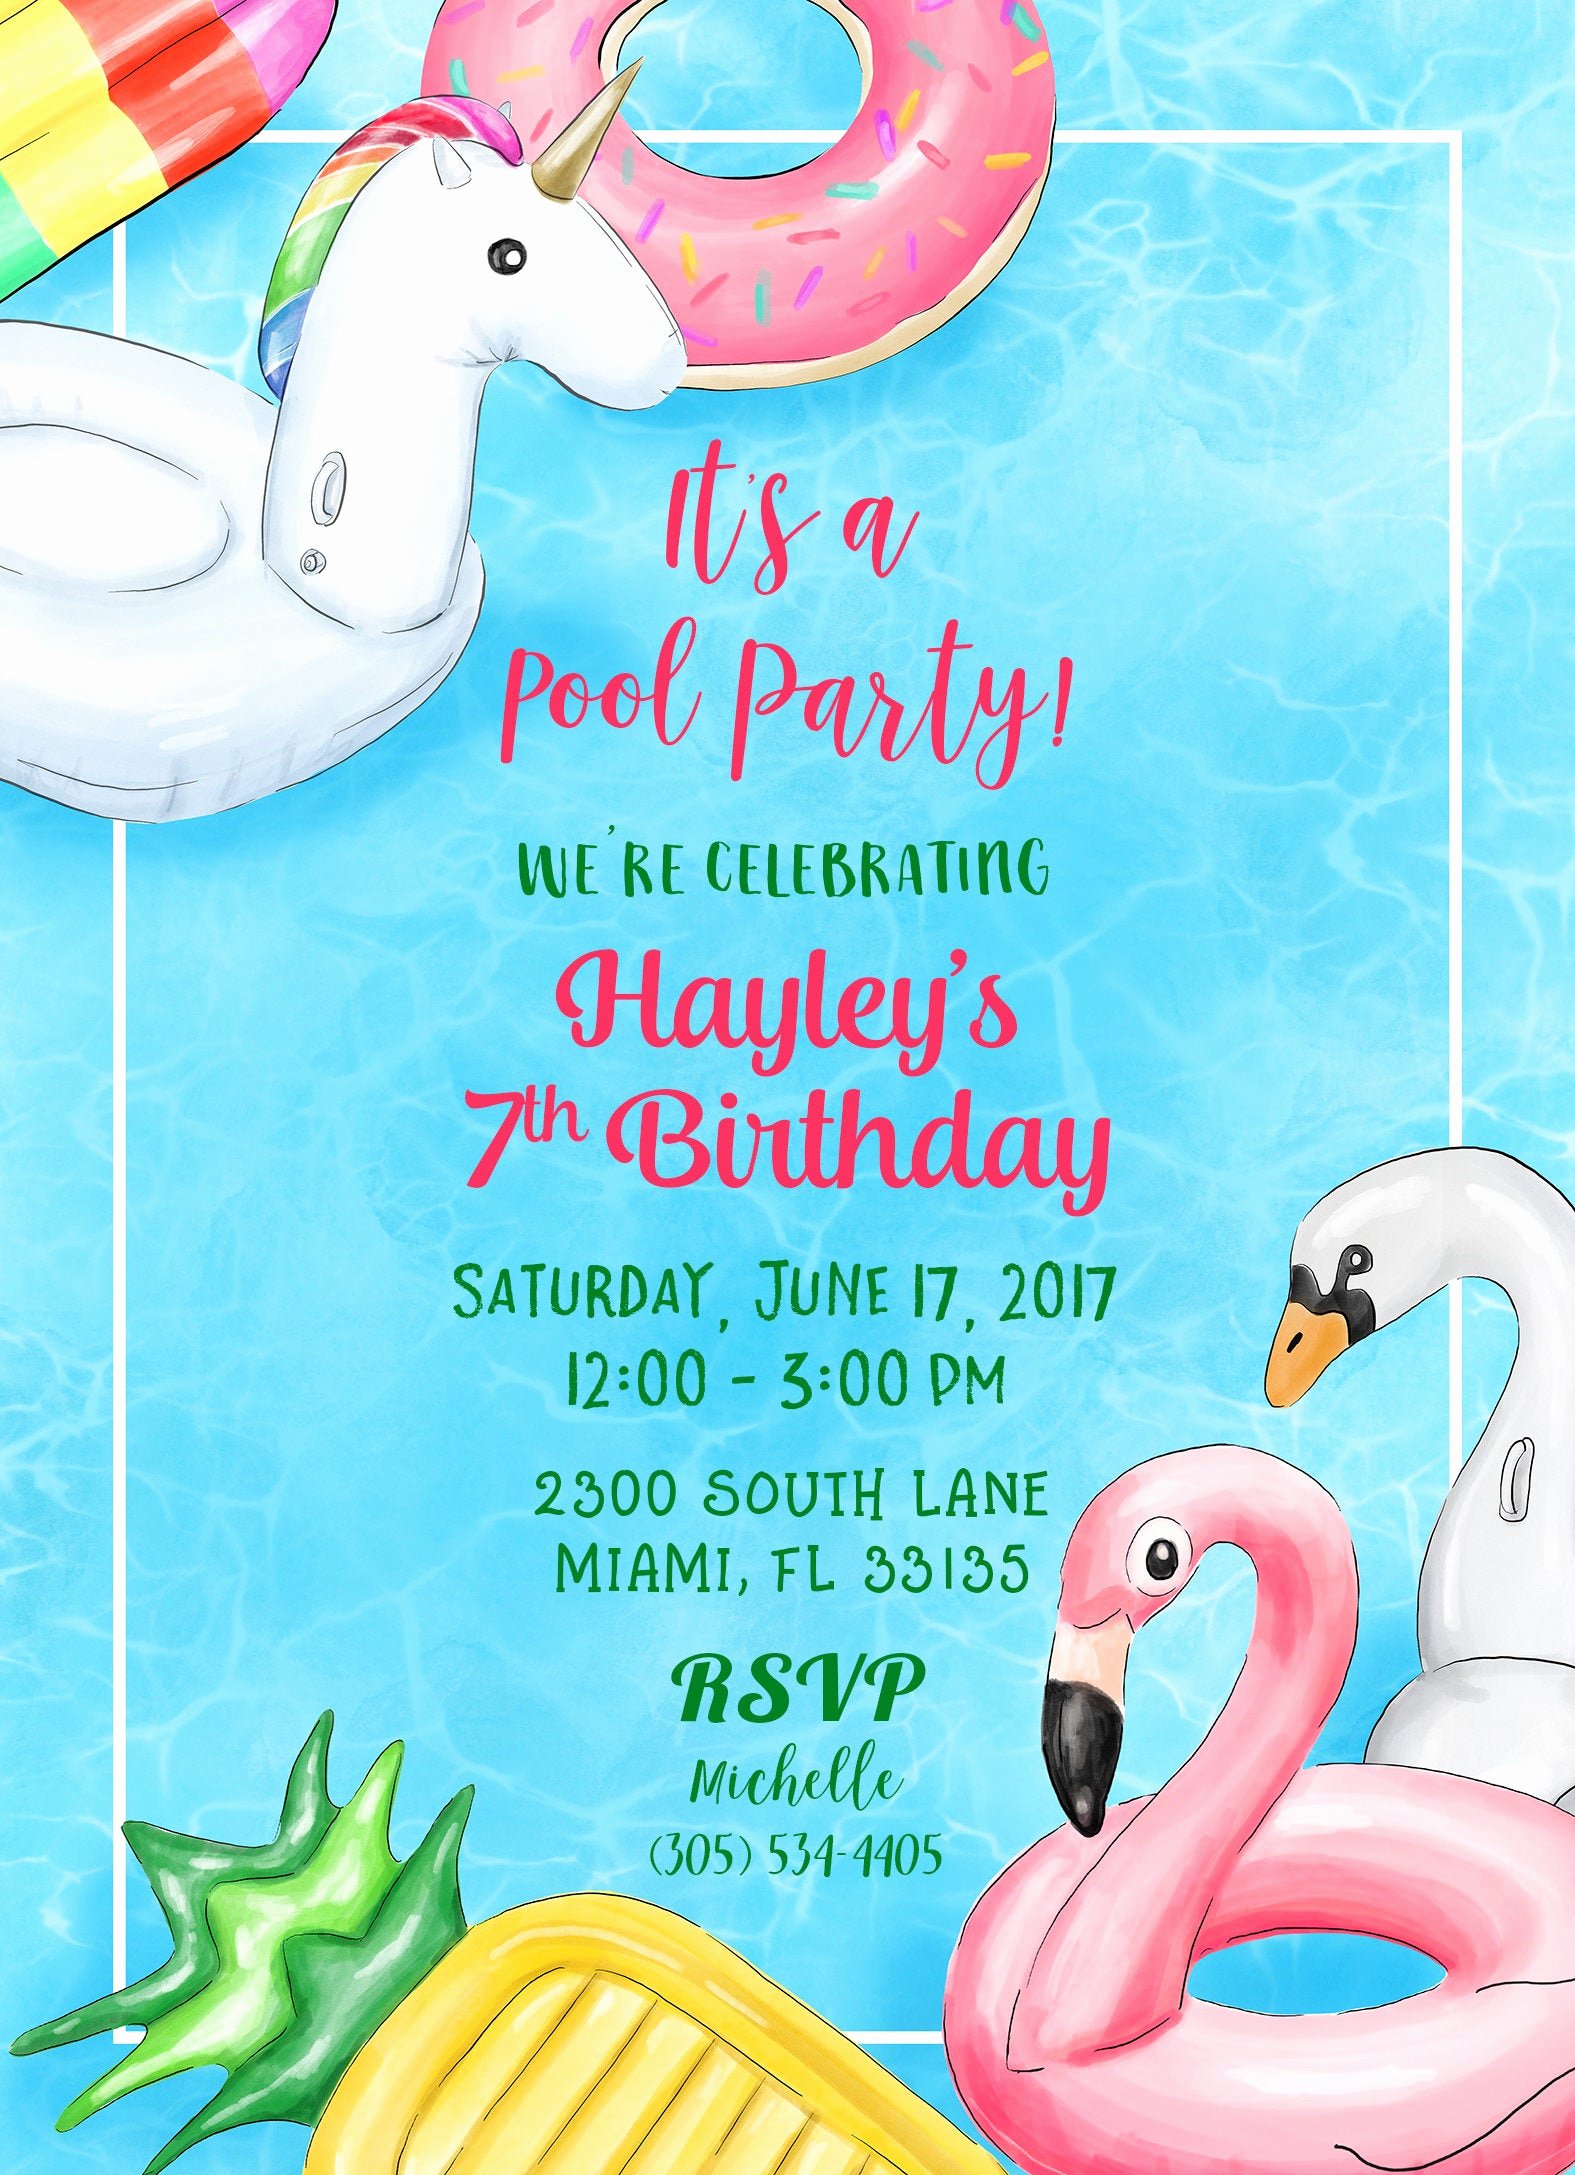 Summer Pool Party Invitations Best Of Pool Party Invitation Pool Birthday Invitation Pool